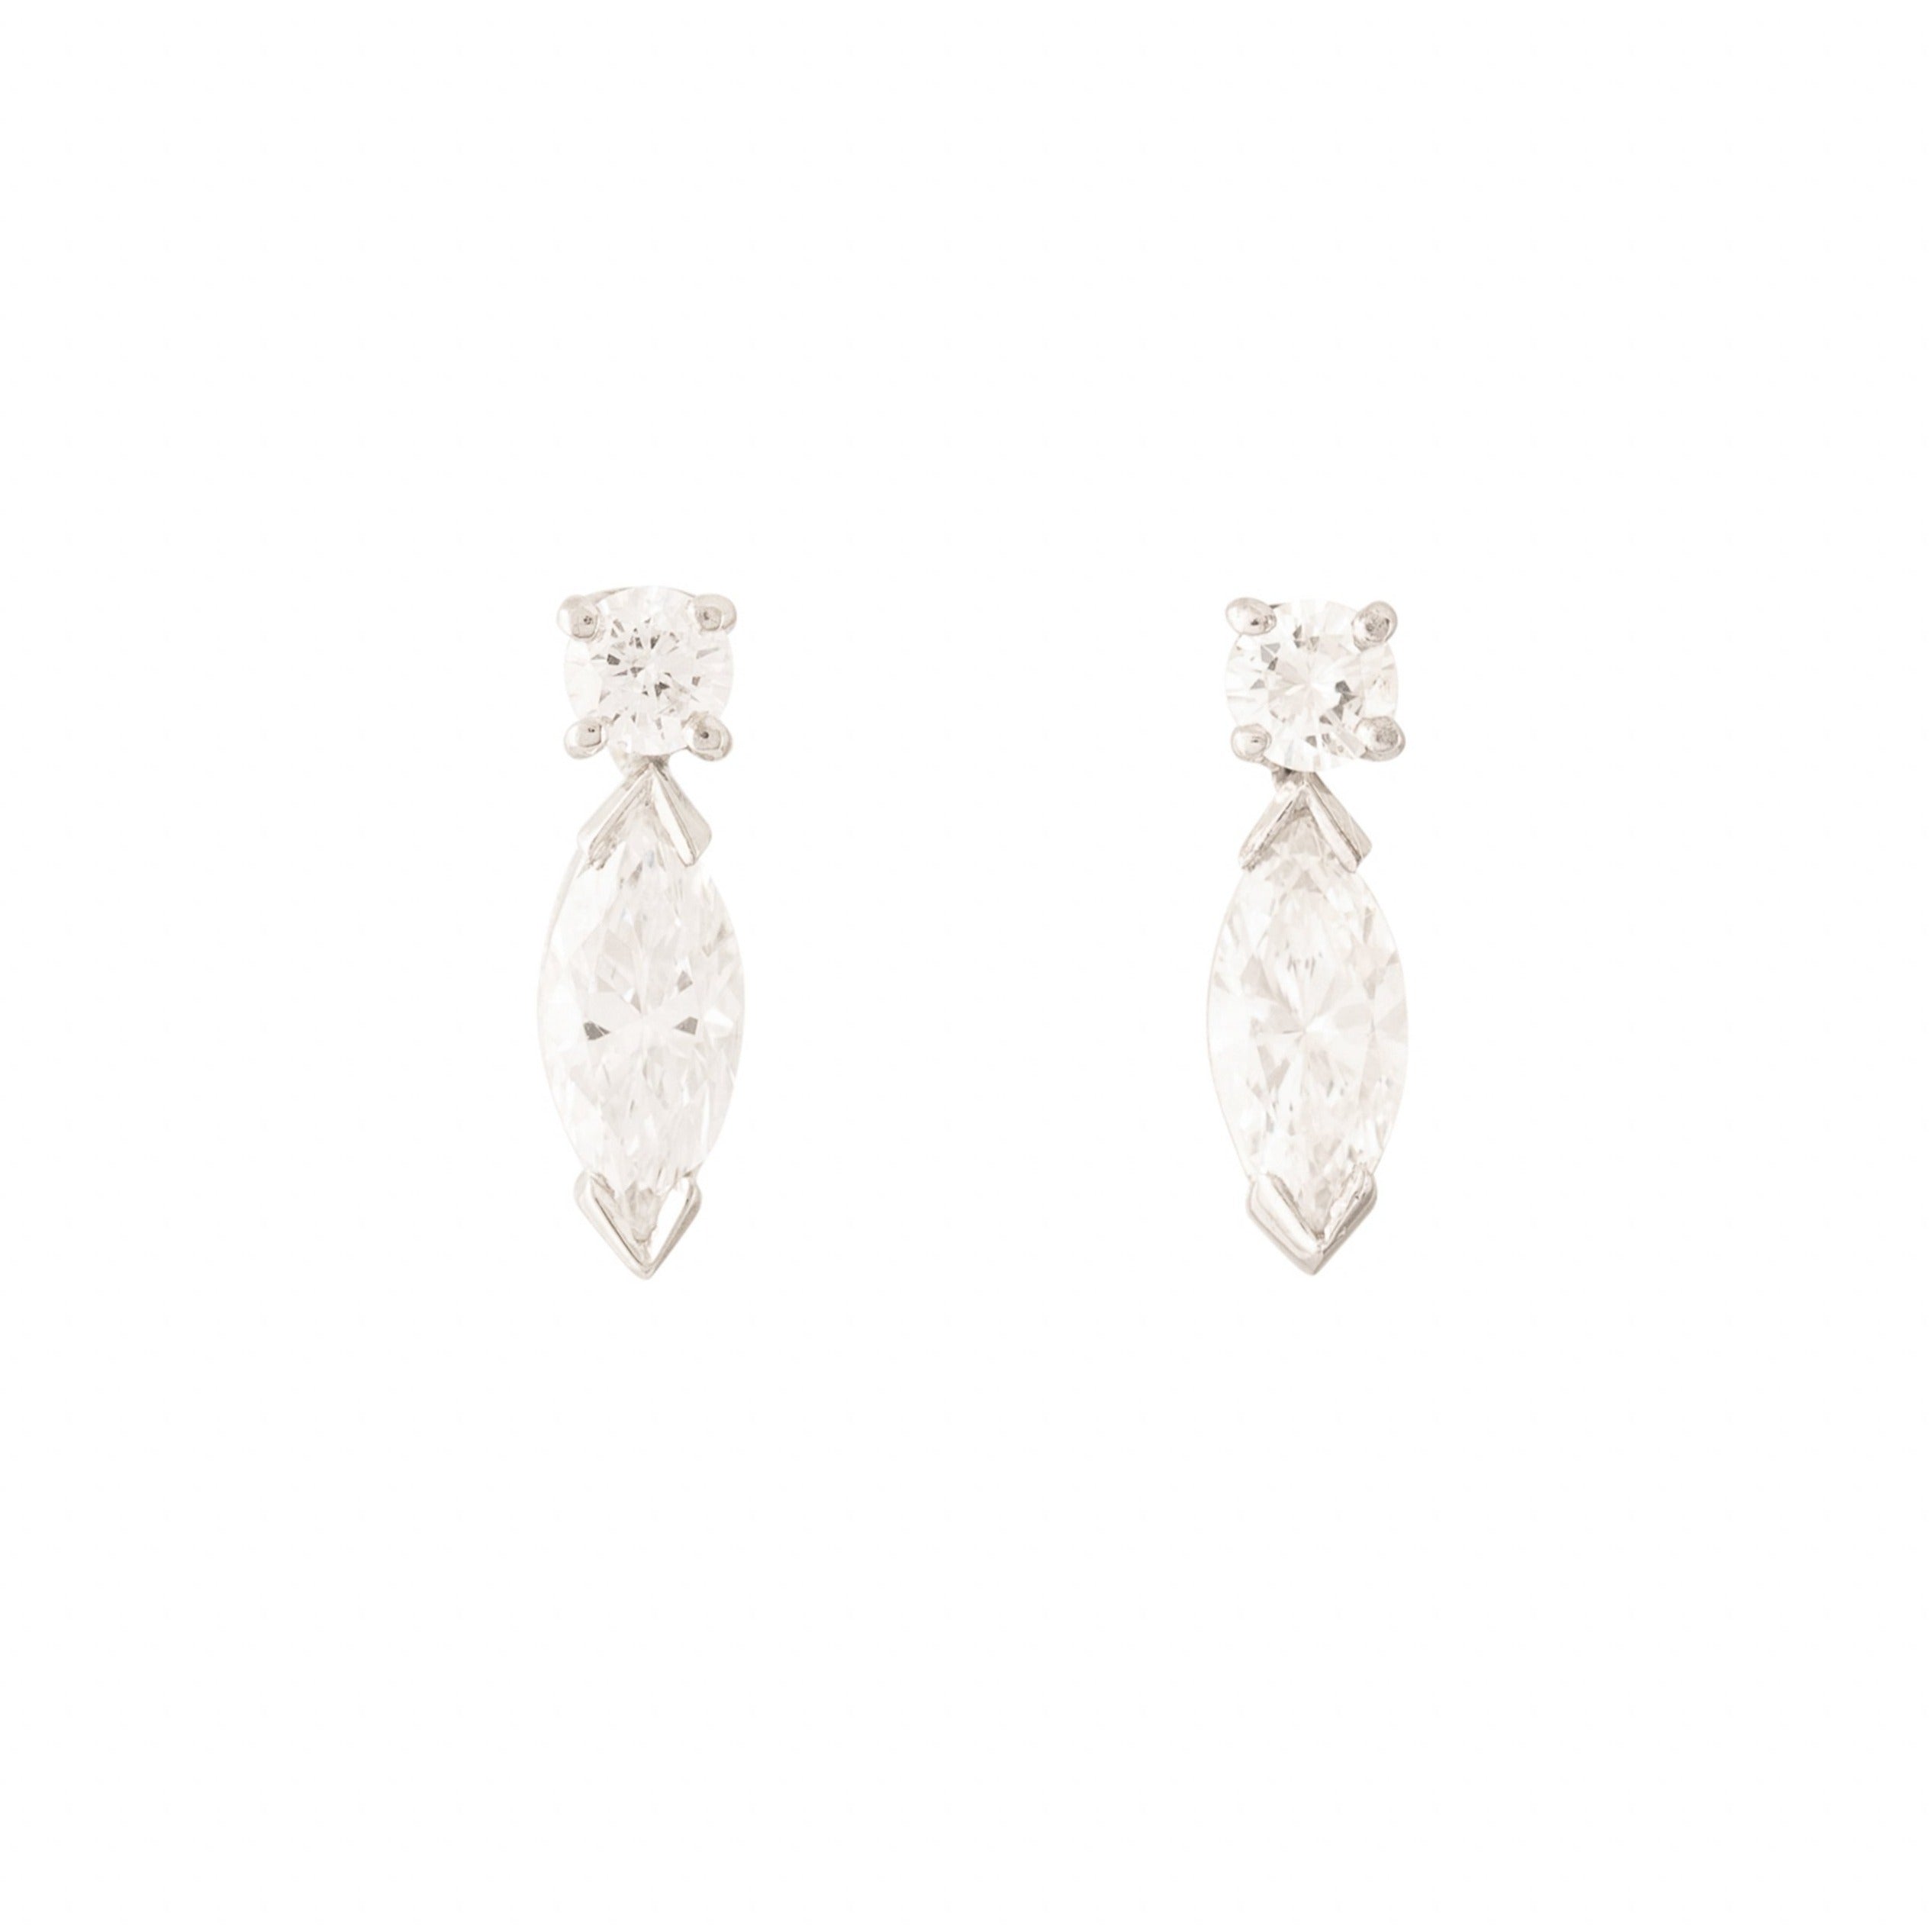 Marquise and Round Diamond Stud Earrings